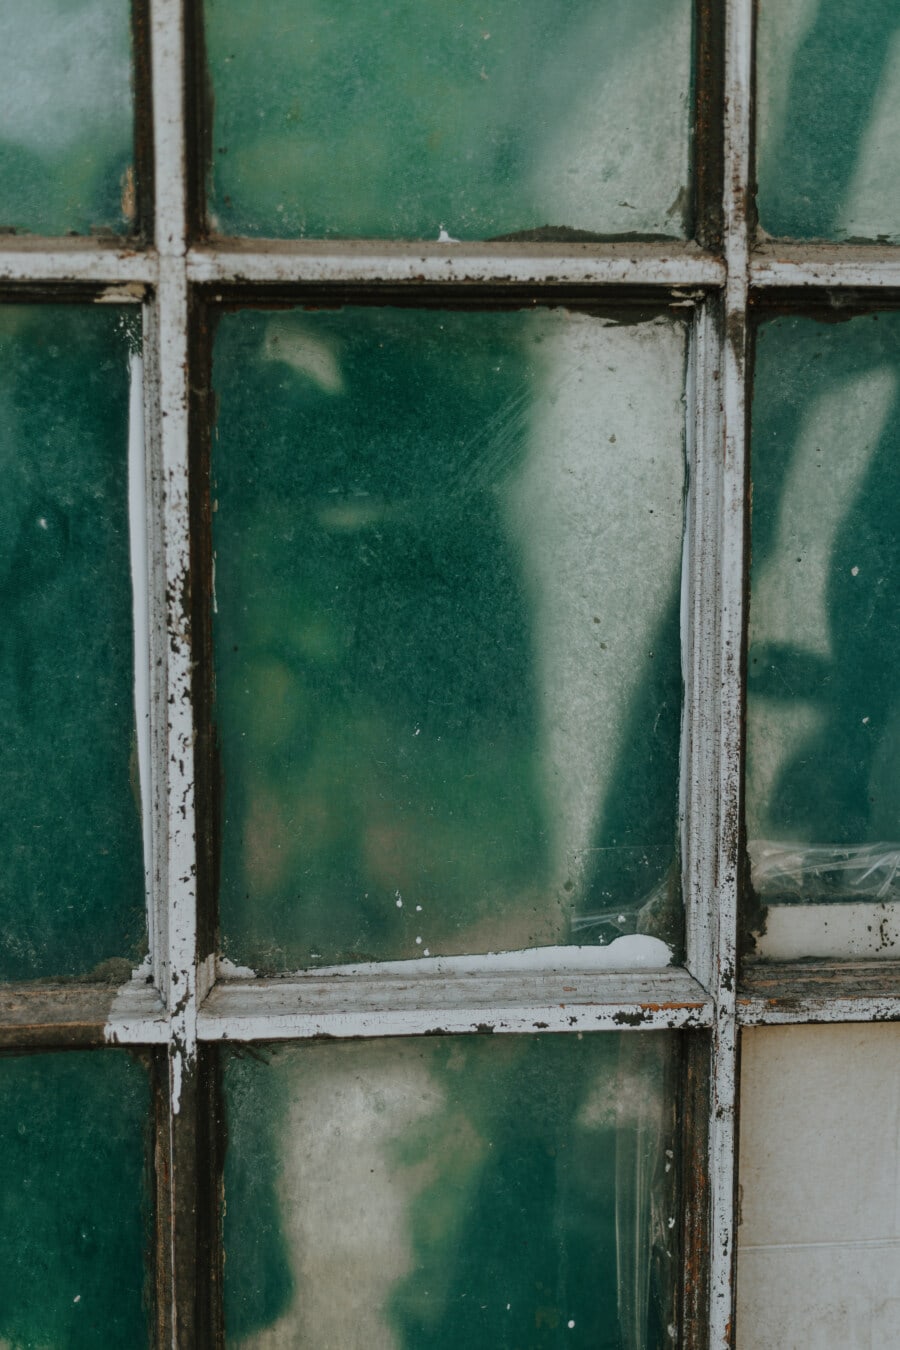 wooden, window, old fashioned, old, dirty, retro, wood, architecture, texture, frame